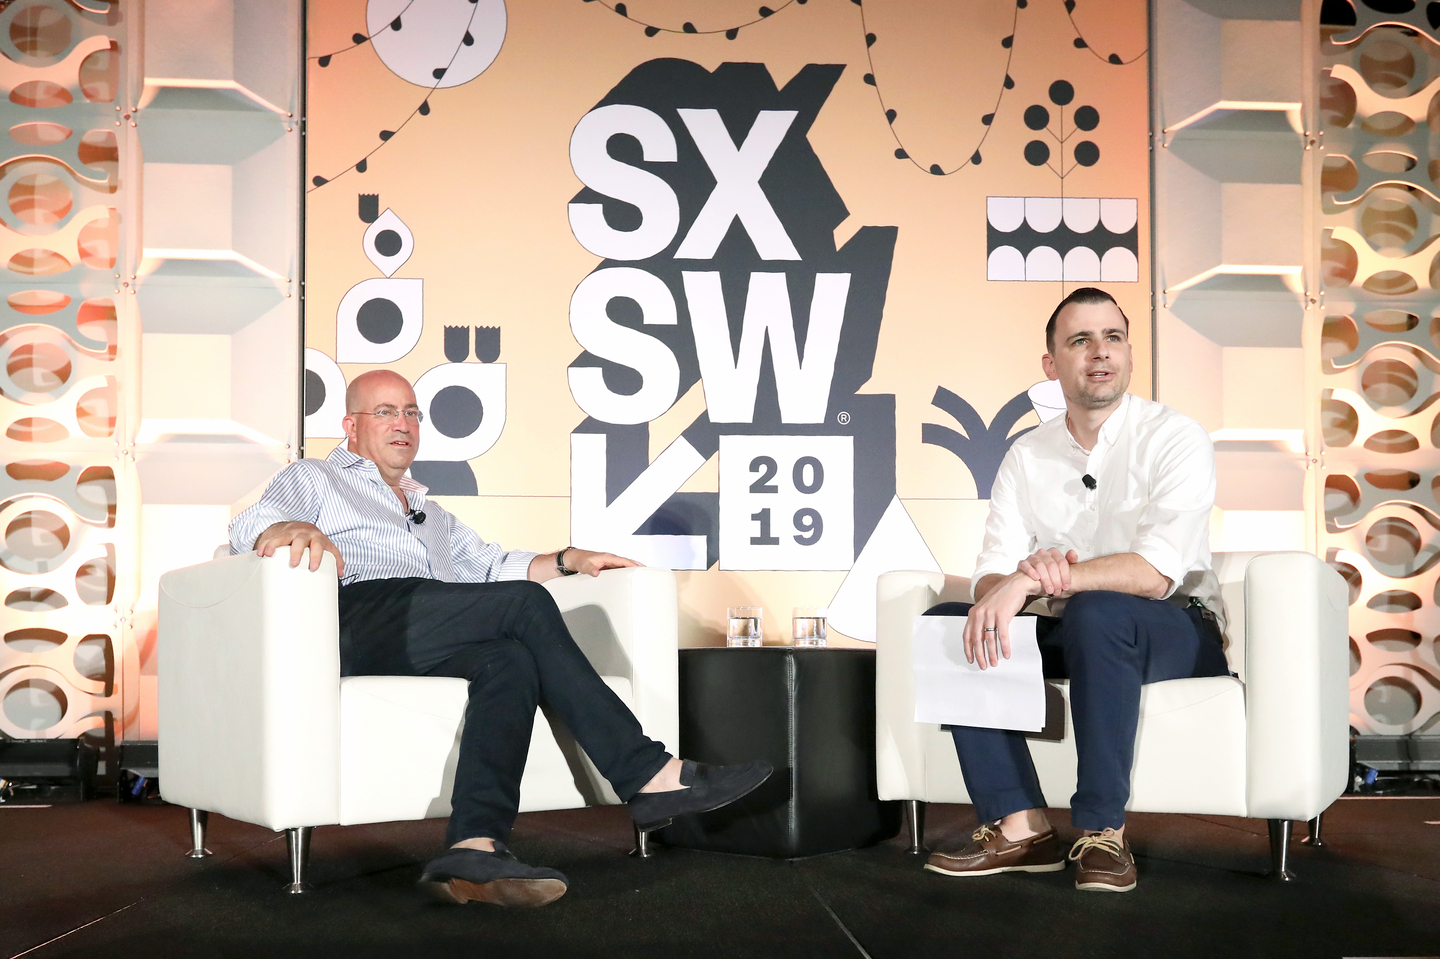 (L-R) Jeff Zucker and Joe Pompeo at their Featured Session - Photo by Diego Donamaria/Getty Images for SXSW